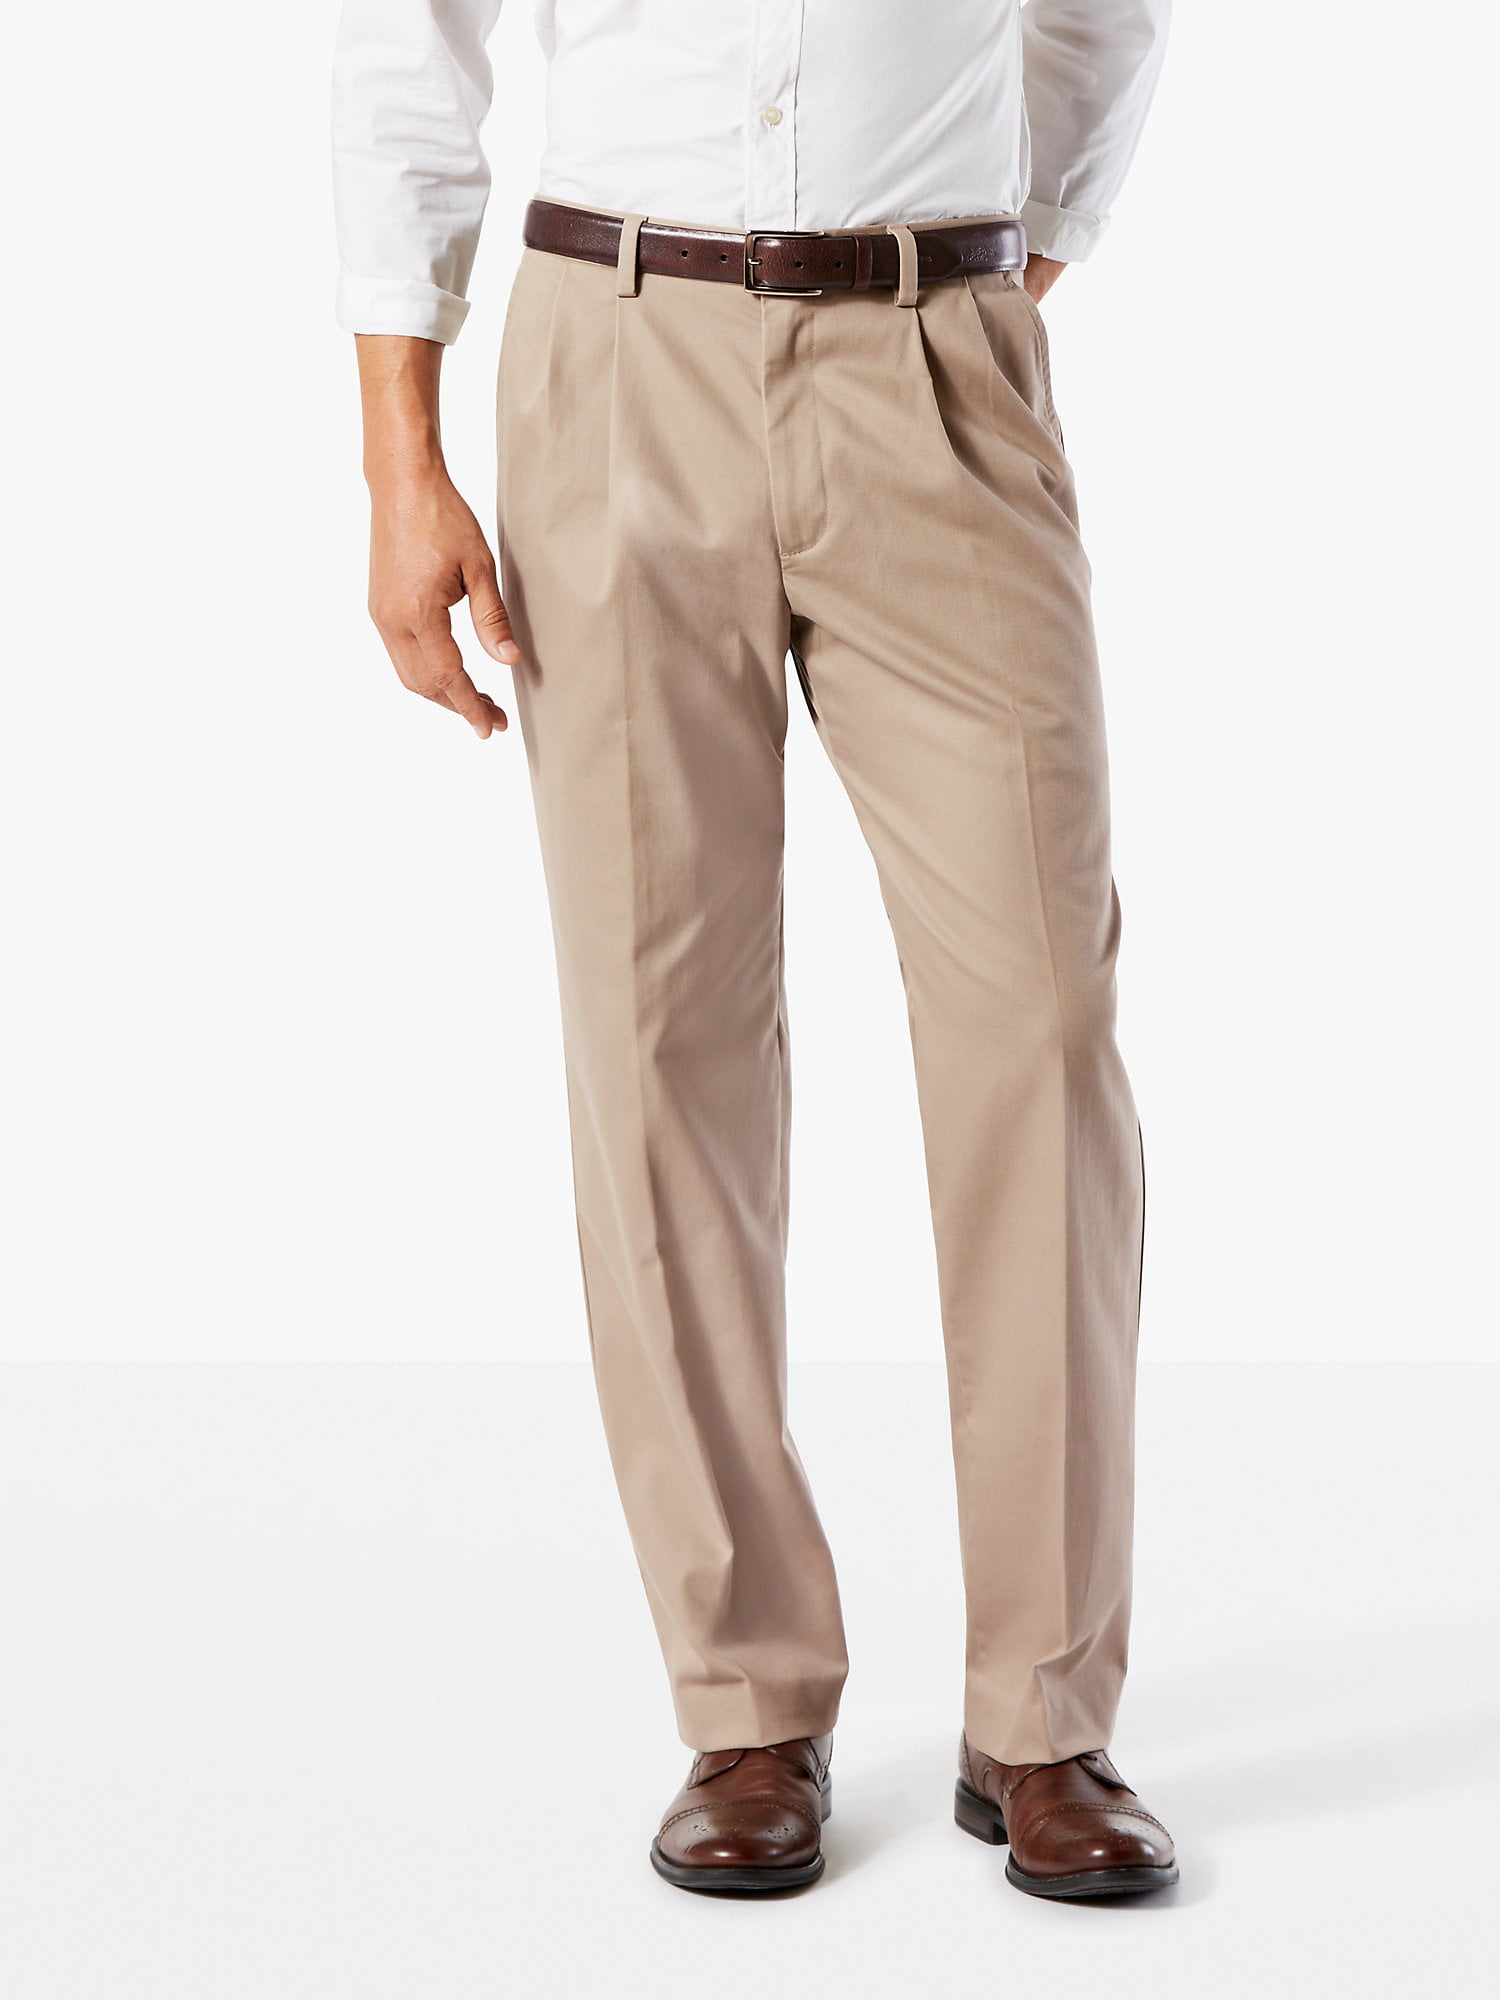 Dockers #9845 NEW Men's Pleated Classic Fit Easy Khaki Stretch Pants